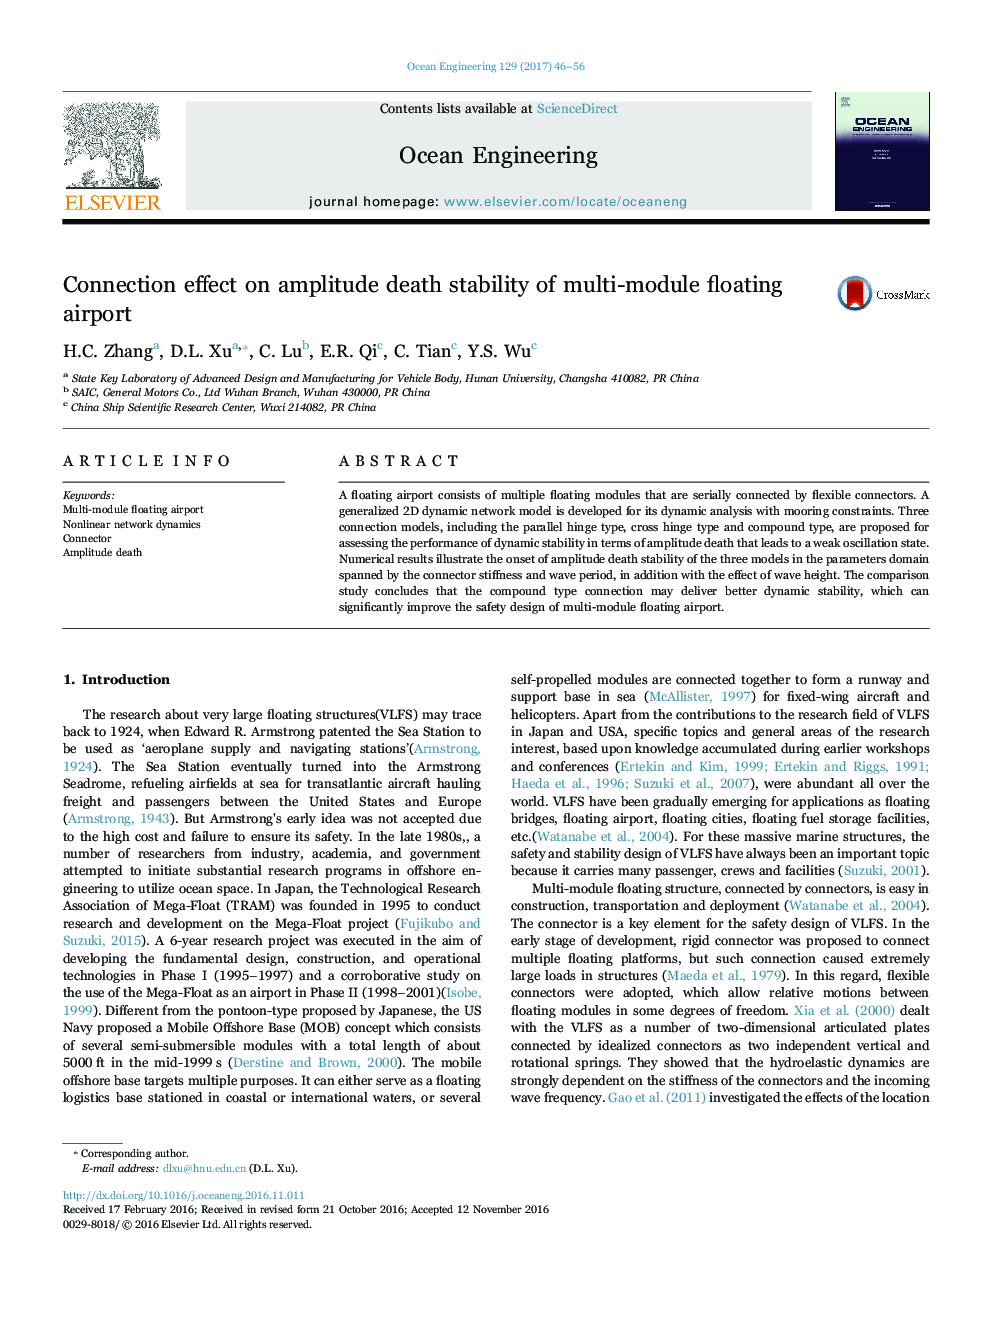 Connection effect on amplitude death stability of multi-module floating airport